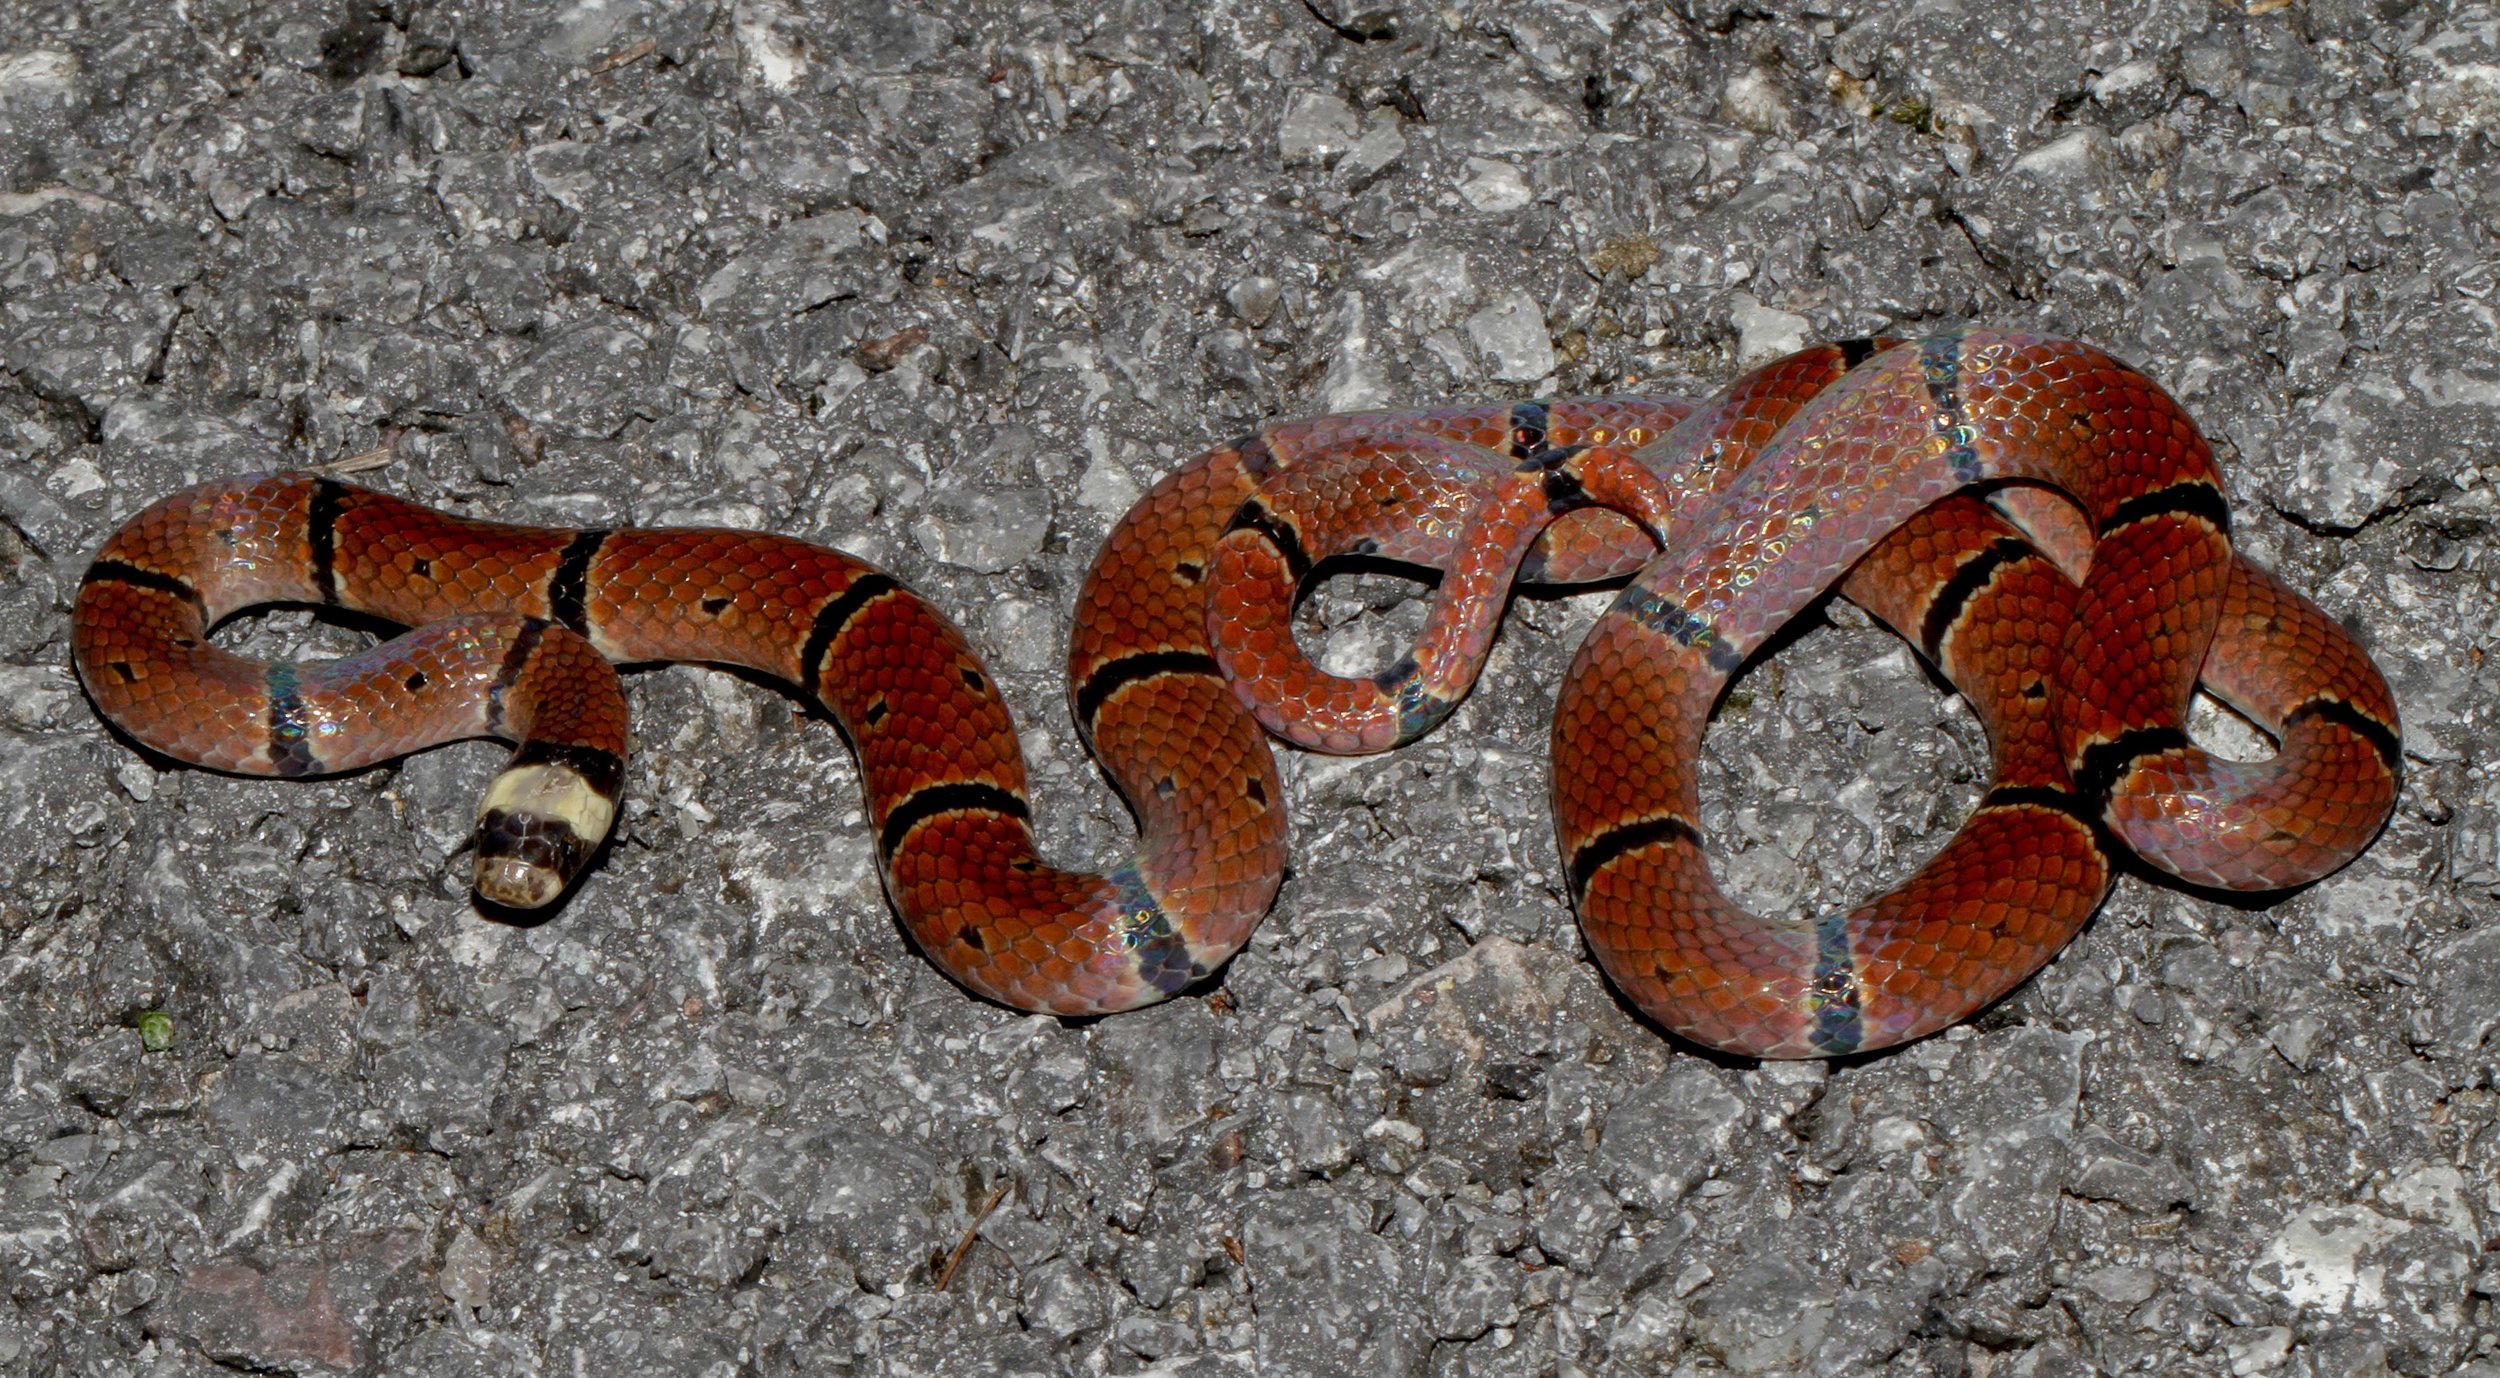 Copy of McClelland's Coral Snake